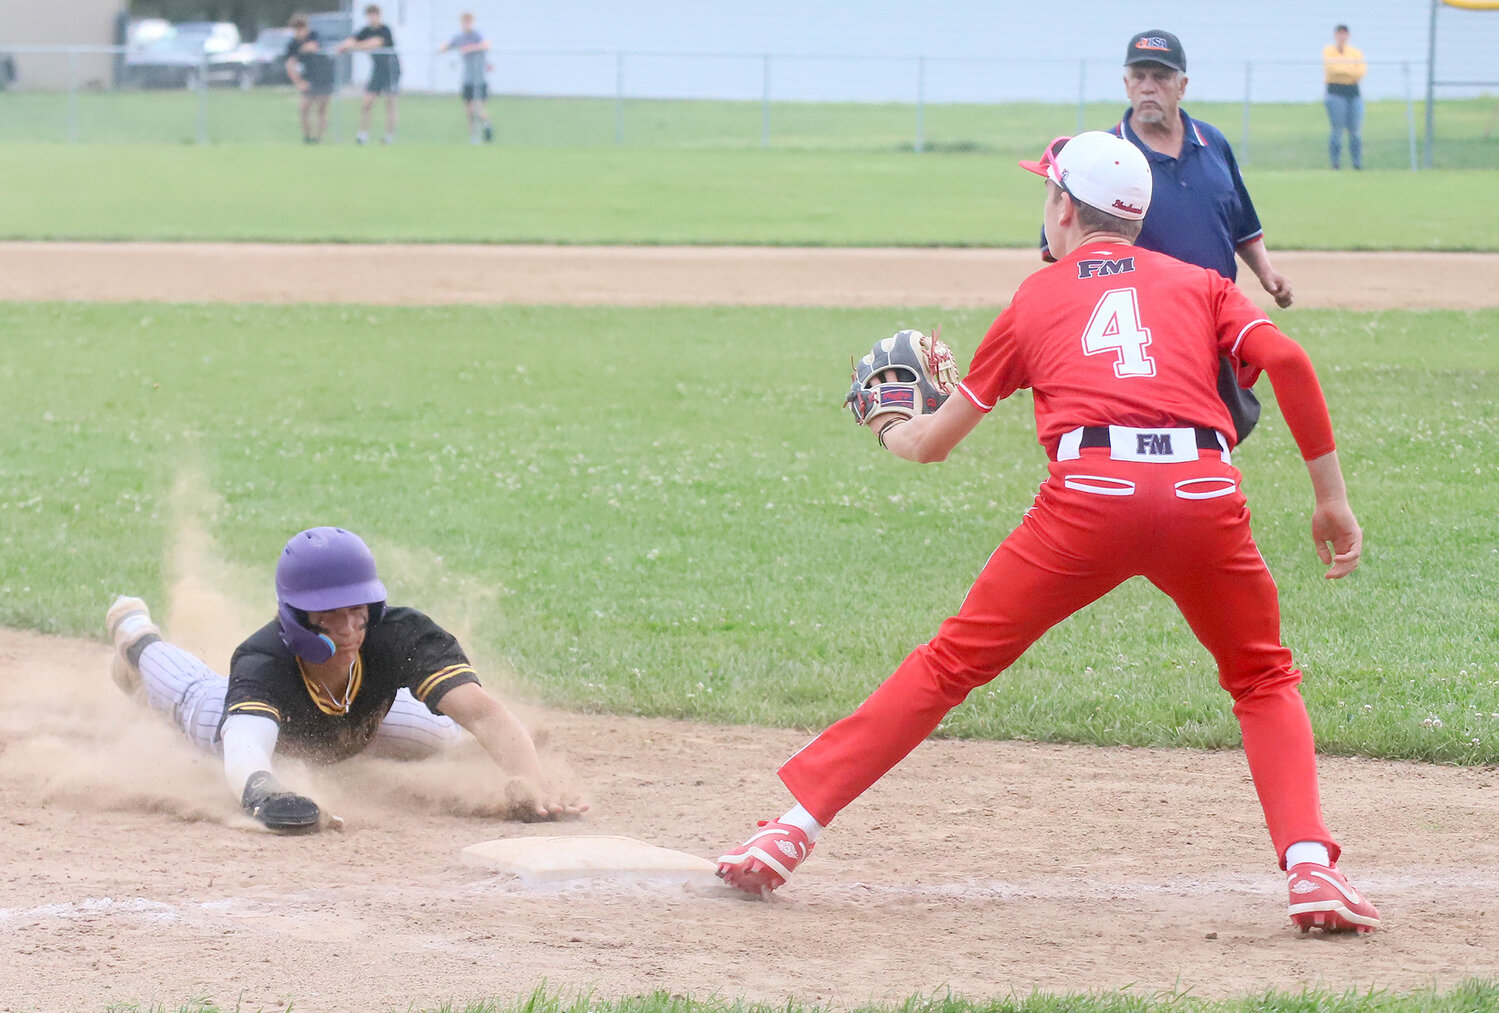 The Hounds' Stefan Berlett (4) waits on a throw at third as a Muskie slides in head first. Fort Madison fell to .500 on the season with two losses Friday night to Muscatine.